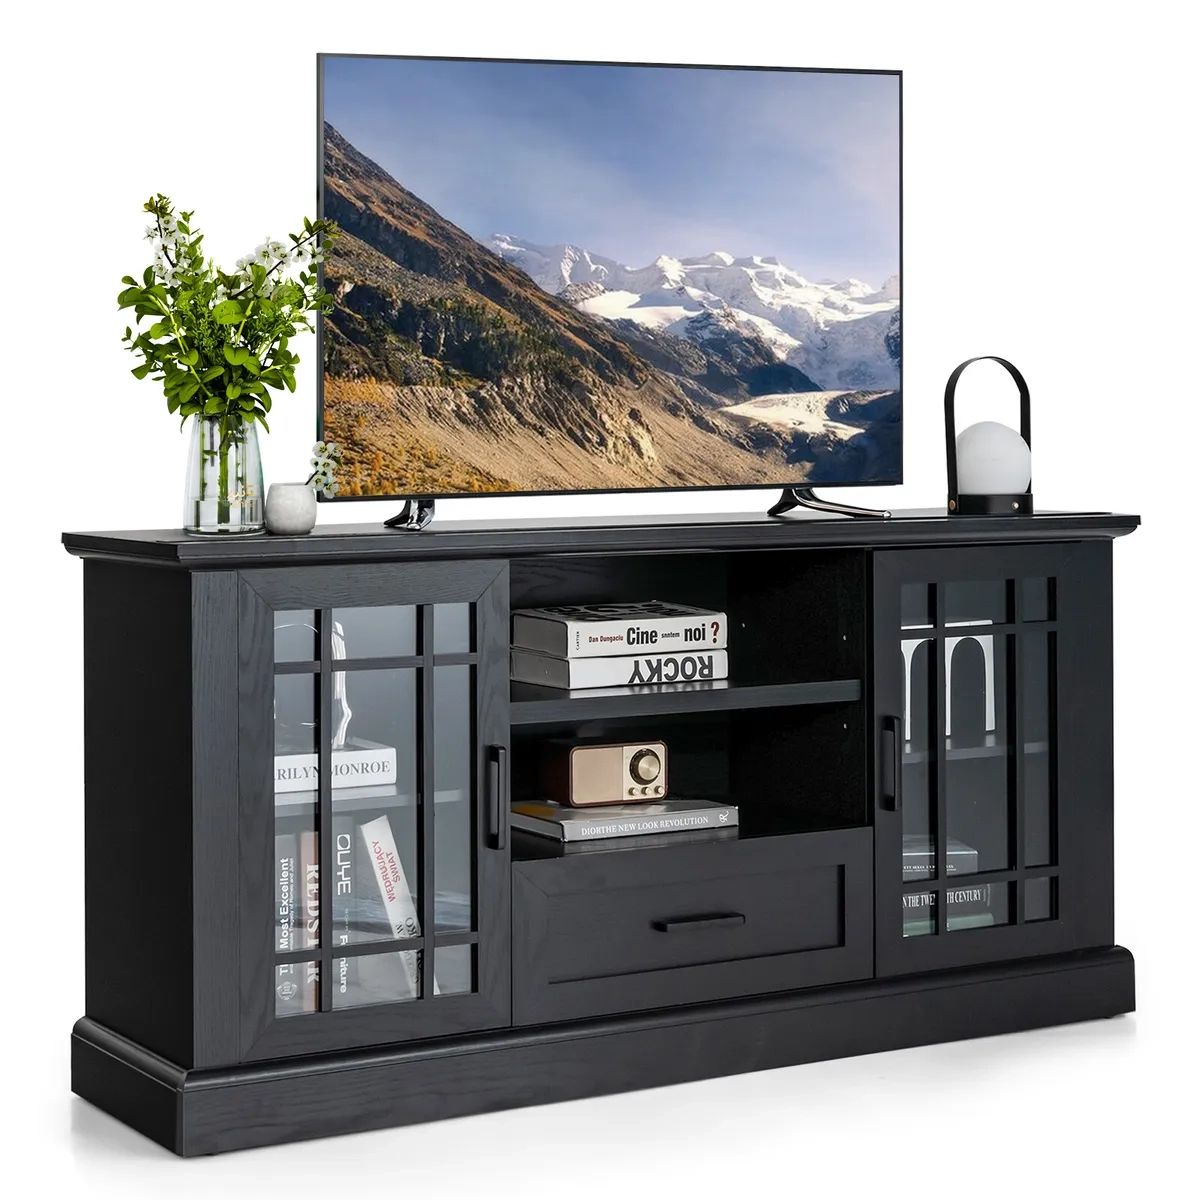 Multi Function Tv Stand W/ 2 Side Cabinets & Large Drawer & 2 Open Shelves  Black | Ebay Intended For Tv Stands With 2 Doors And 2 Open Shelves (View 12 of 15)